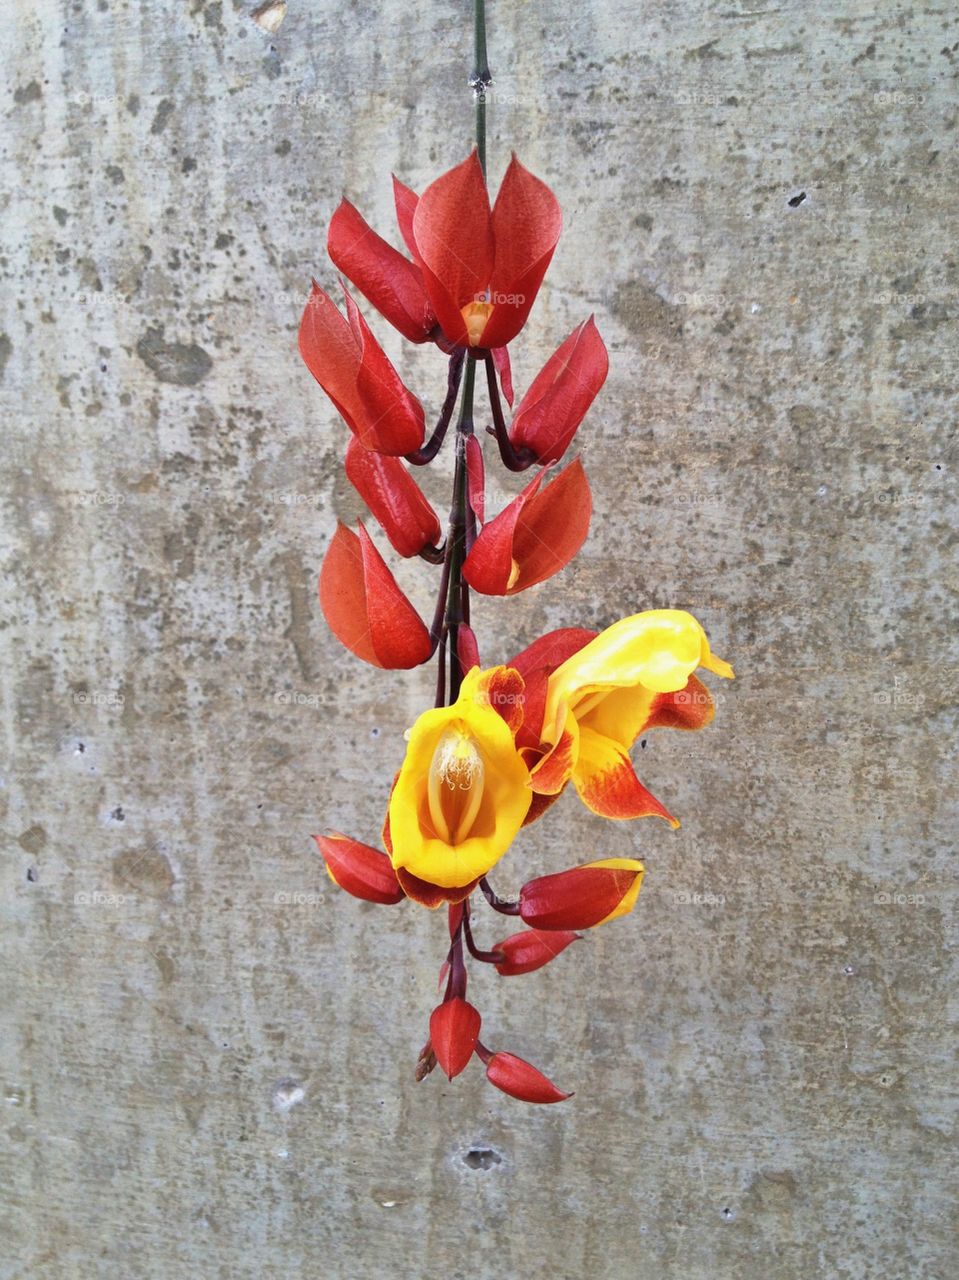 Flower and Concrete. Orange and yellow flower with concrete in the background